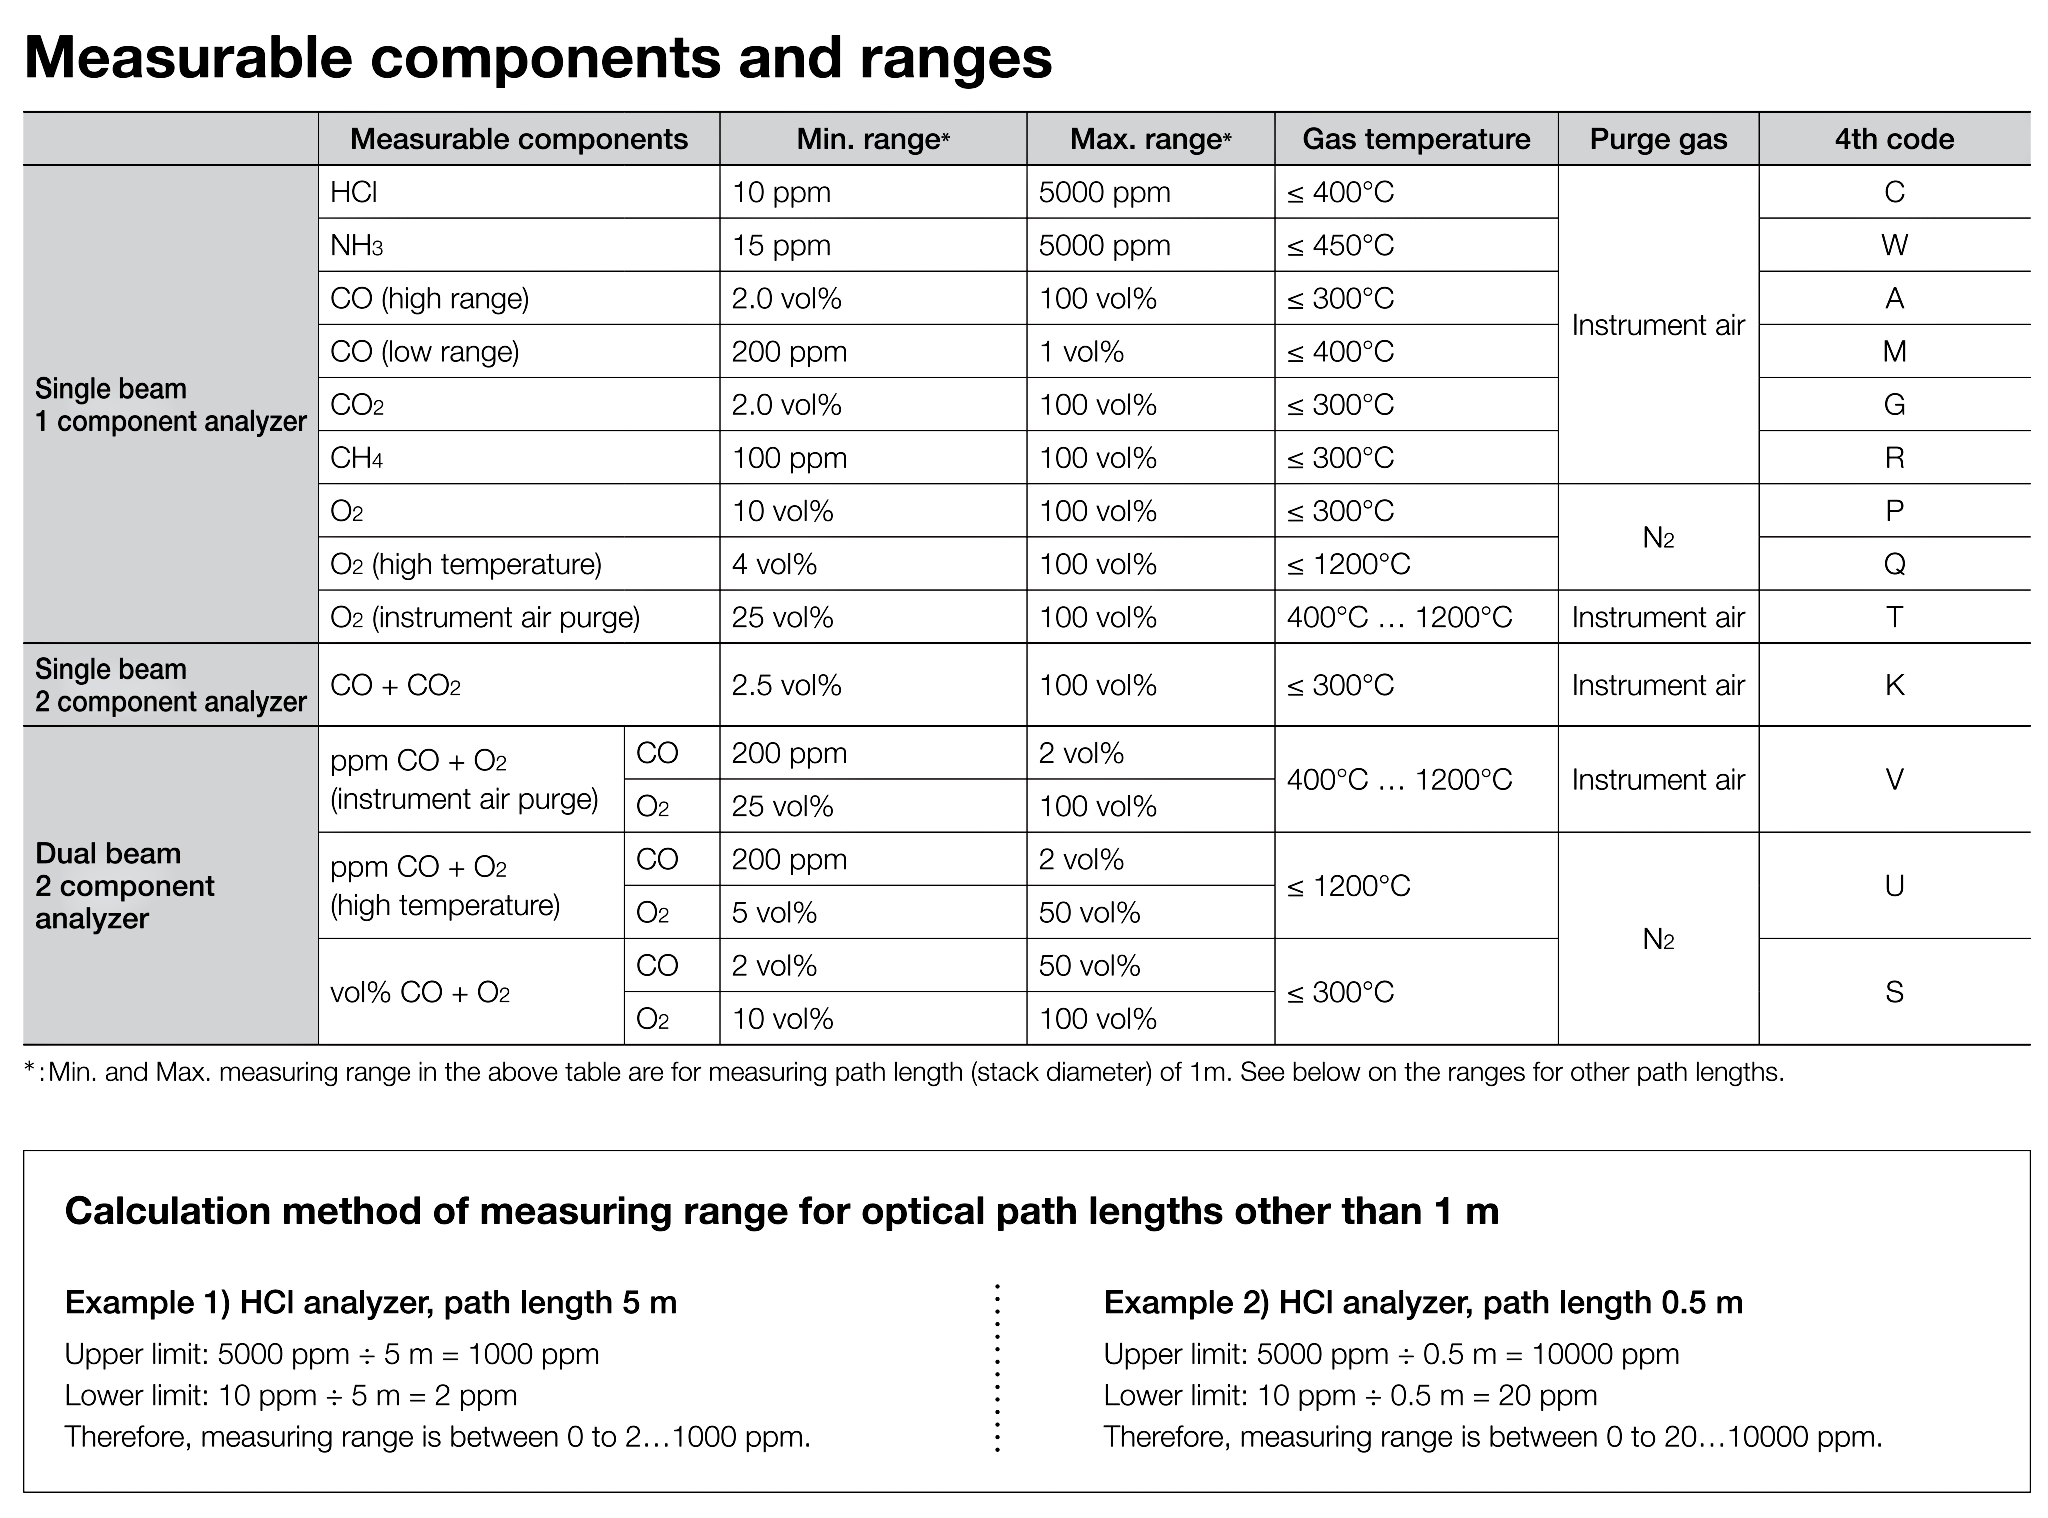 Table 1: Measurable components and ranges